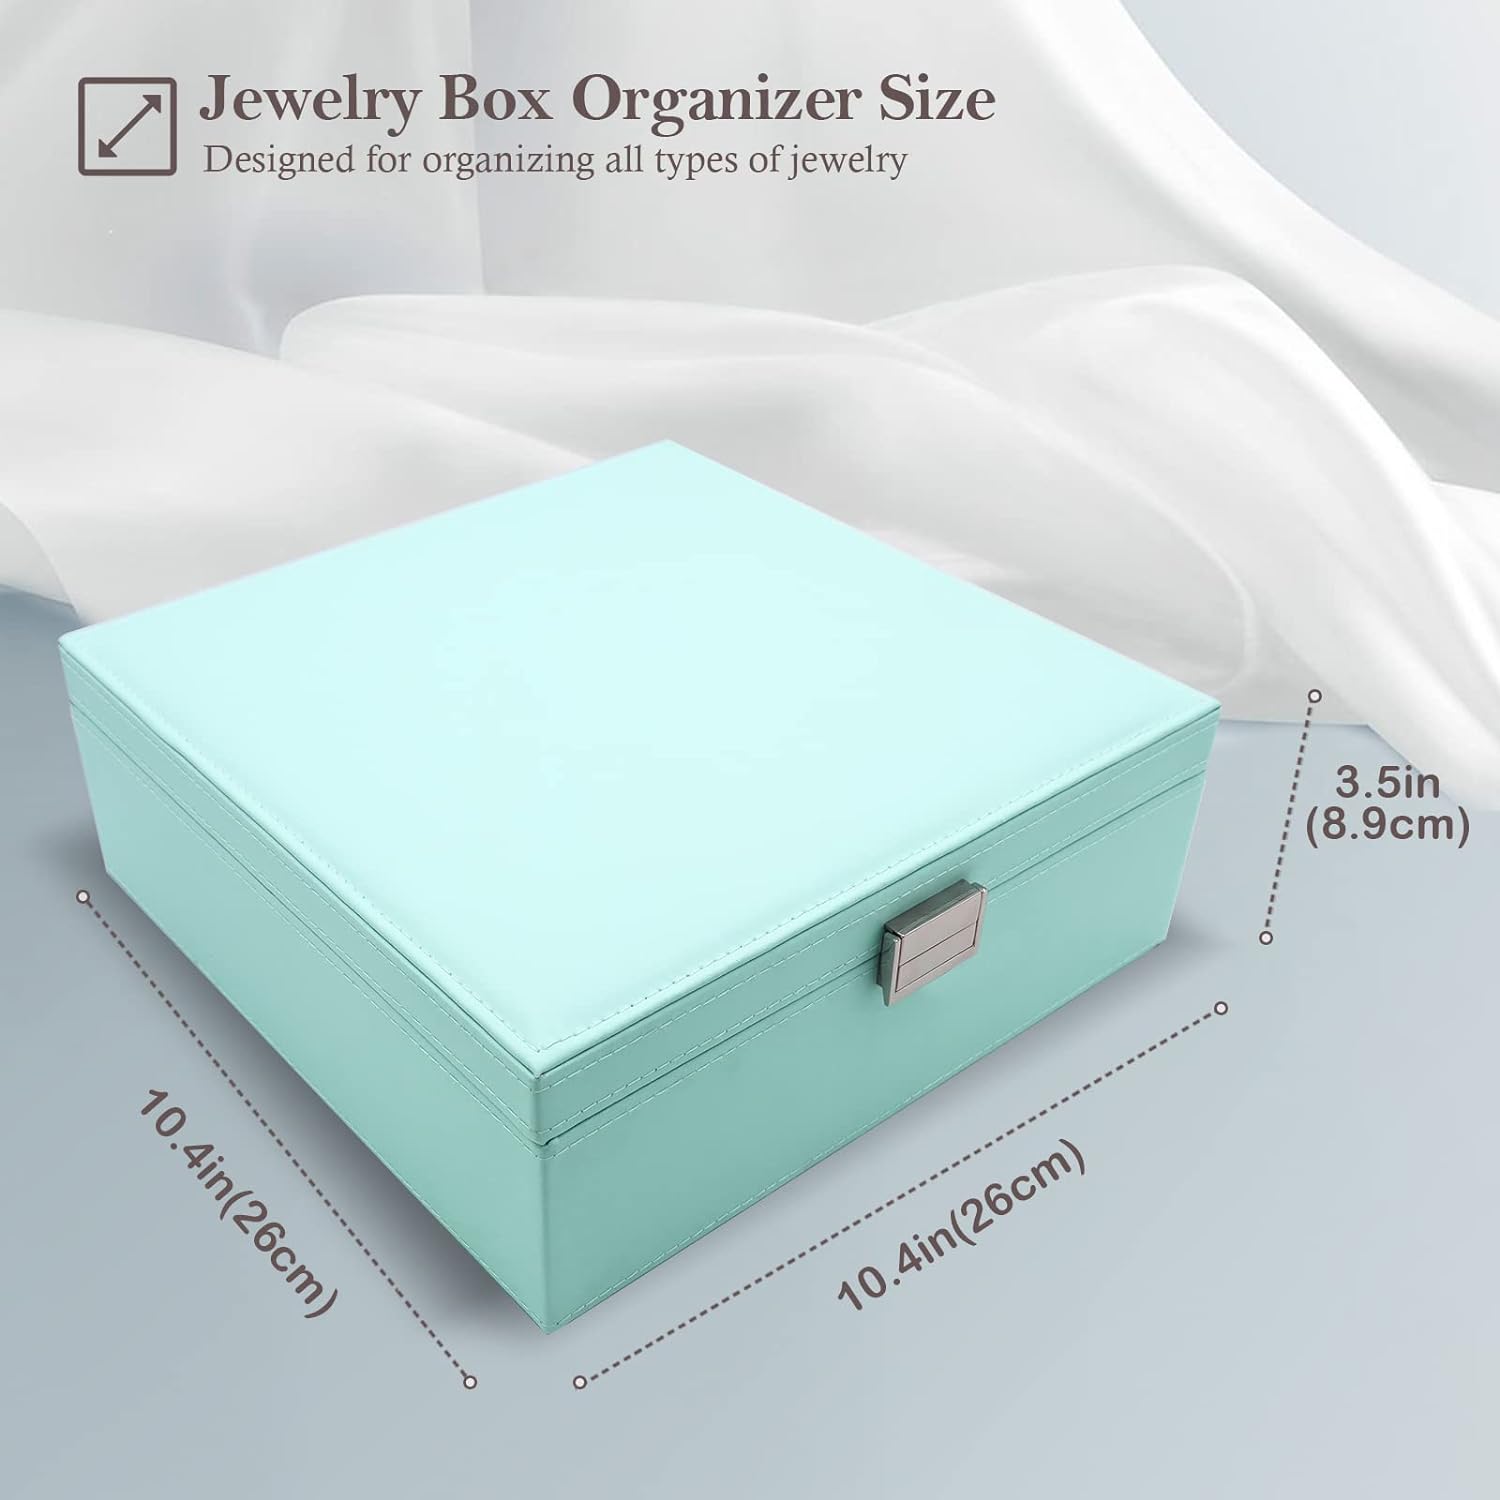 ProCase Jewelry Box for Women Girls Girlfriend Wife, Large Leather Jewelry Organizer Storage Case with Two Layers Display for Earrings Bracelets Rings Watches -Grey